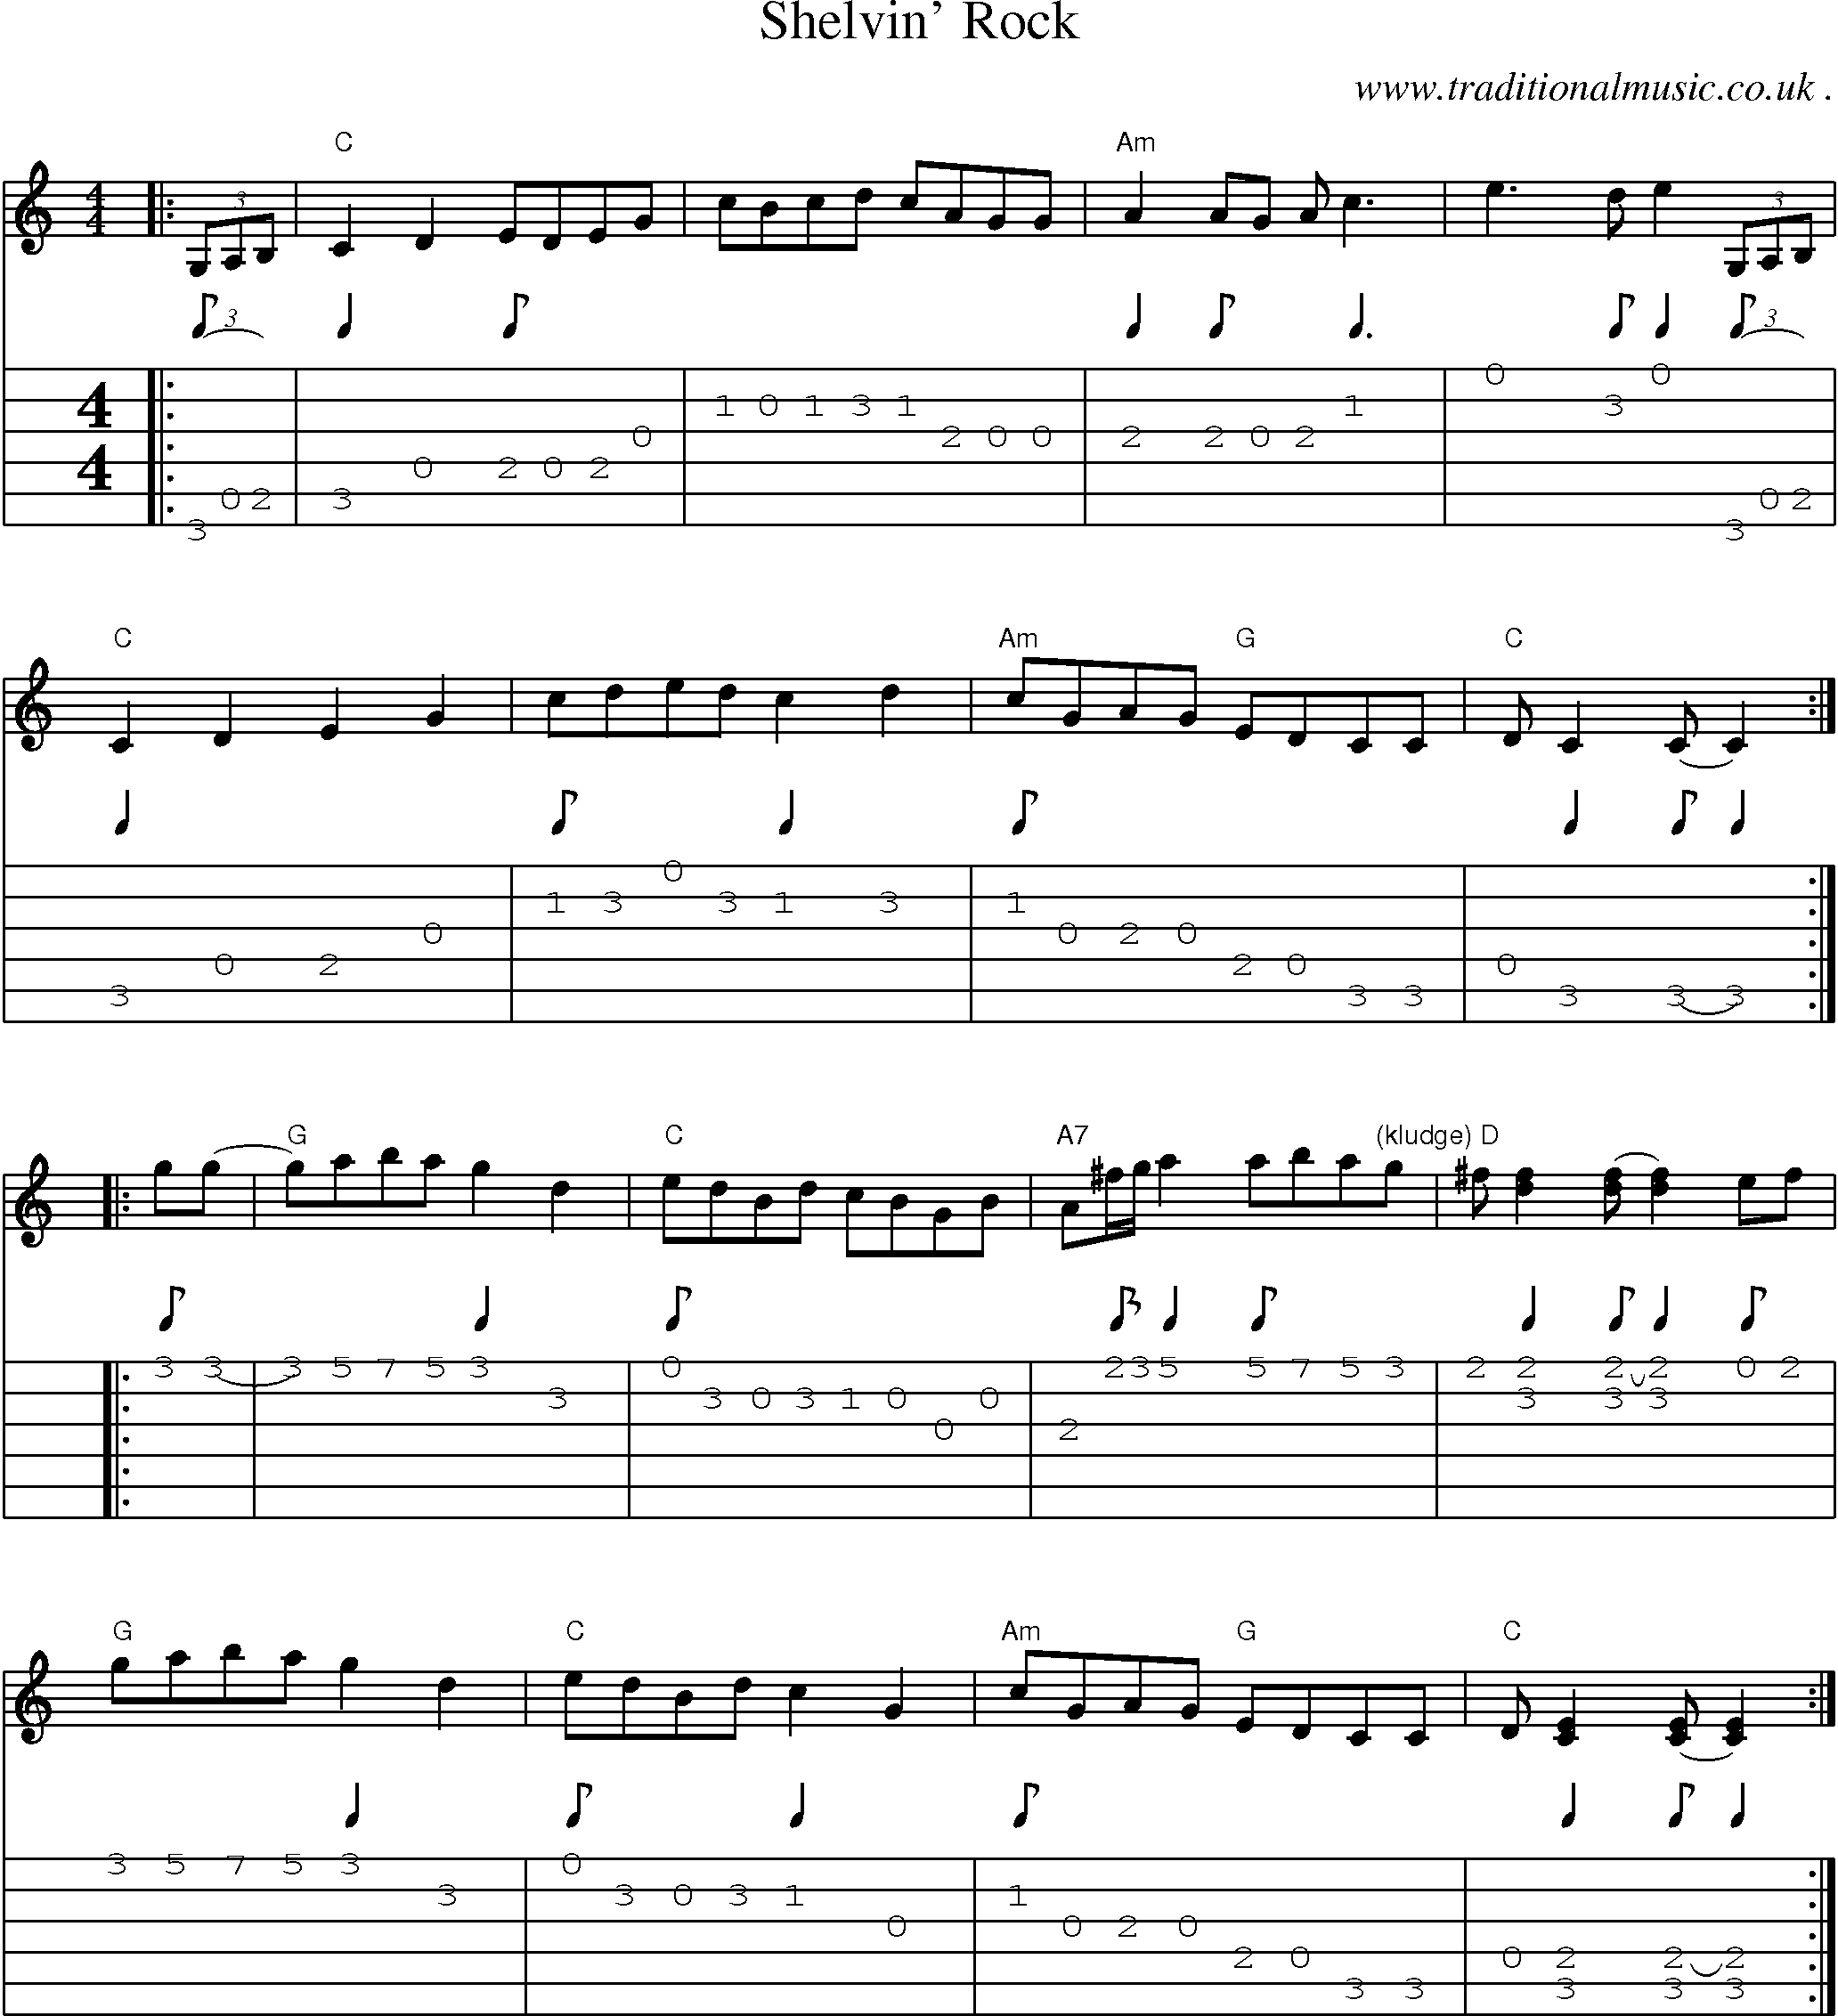 Music Score and Guitar Tabs for Shelvin Rock